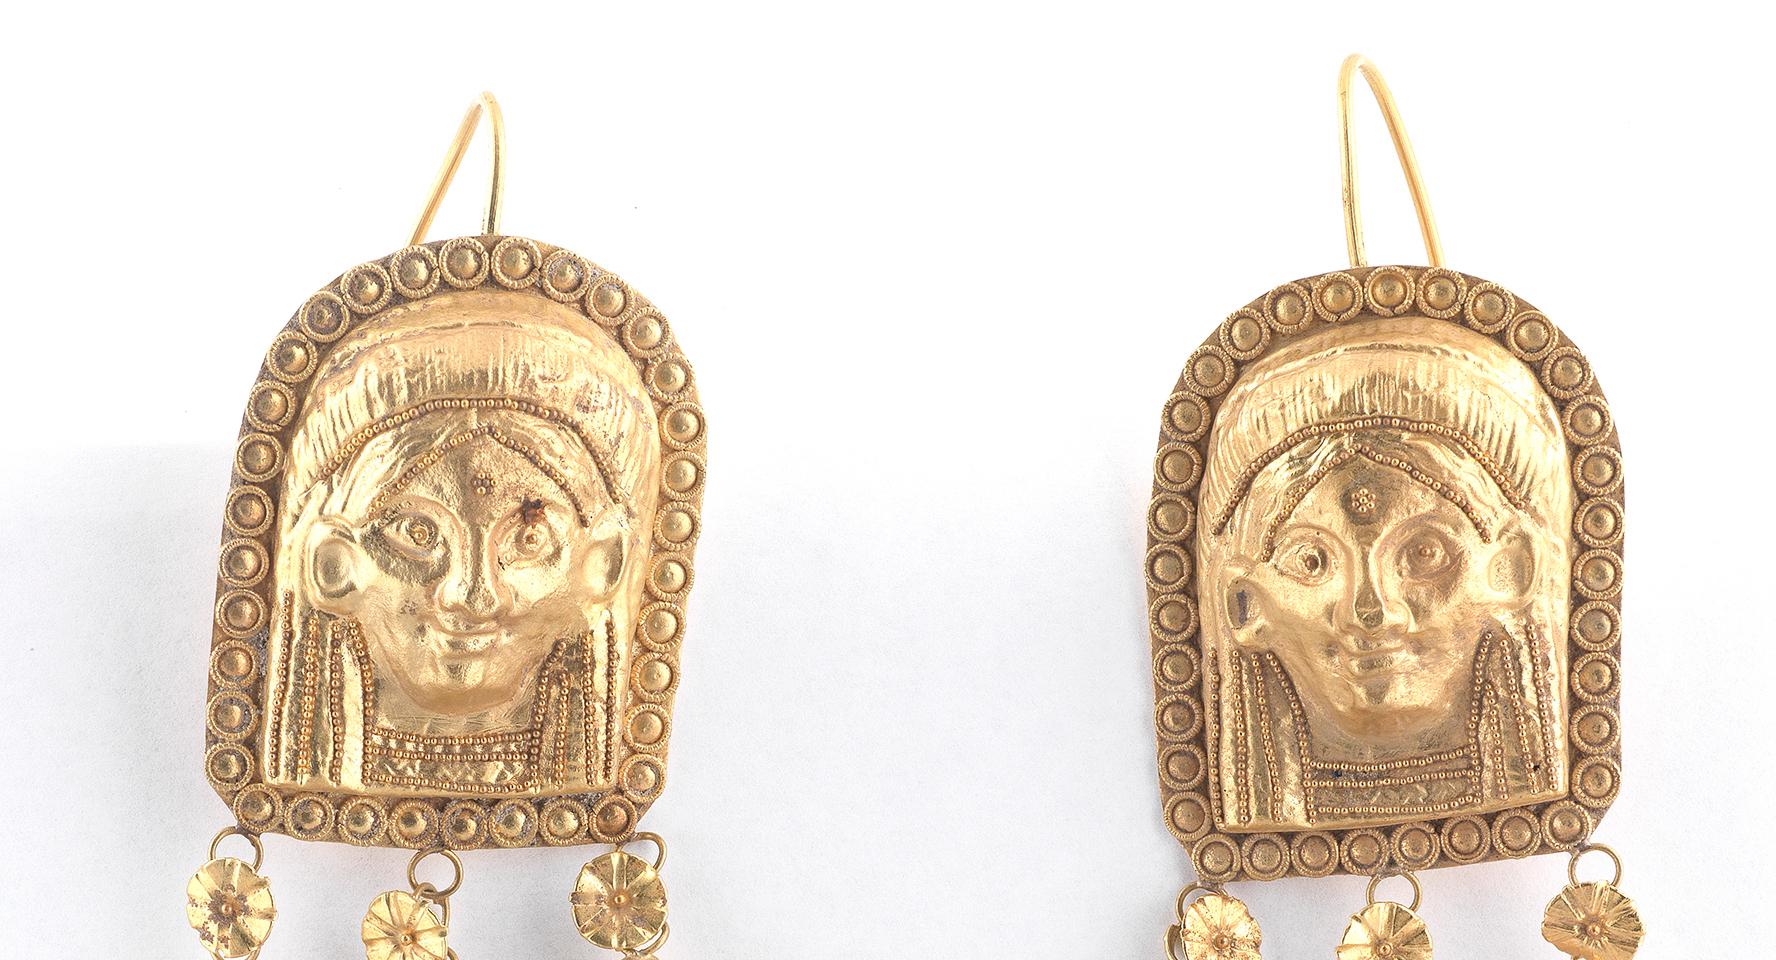 Mythological figures to the applied bead and ropetwist decoration, mounted in gold
length 8.5cm